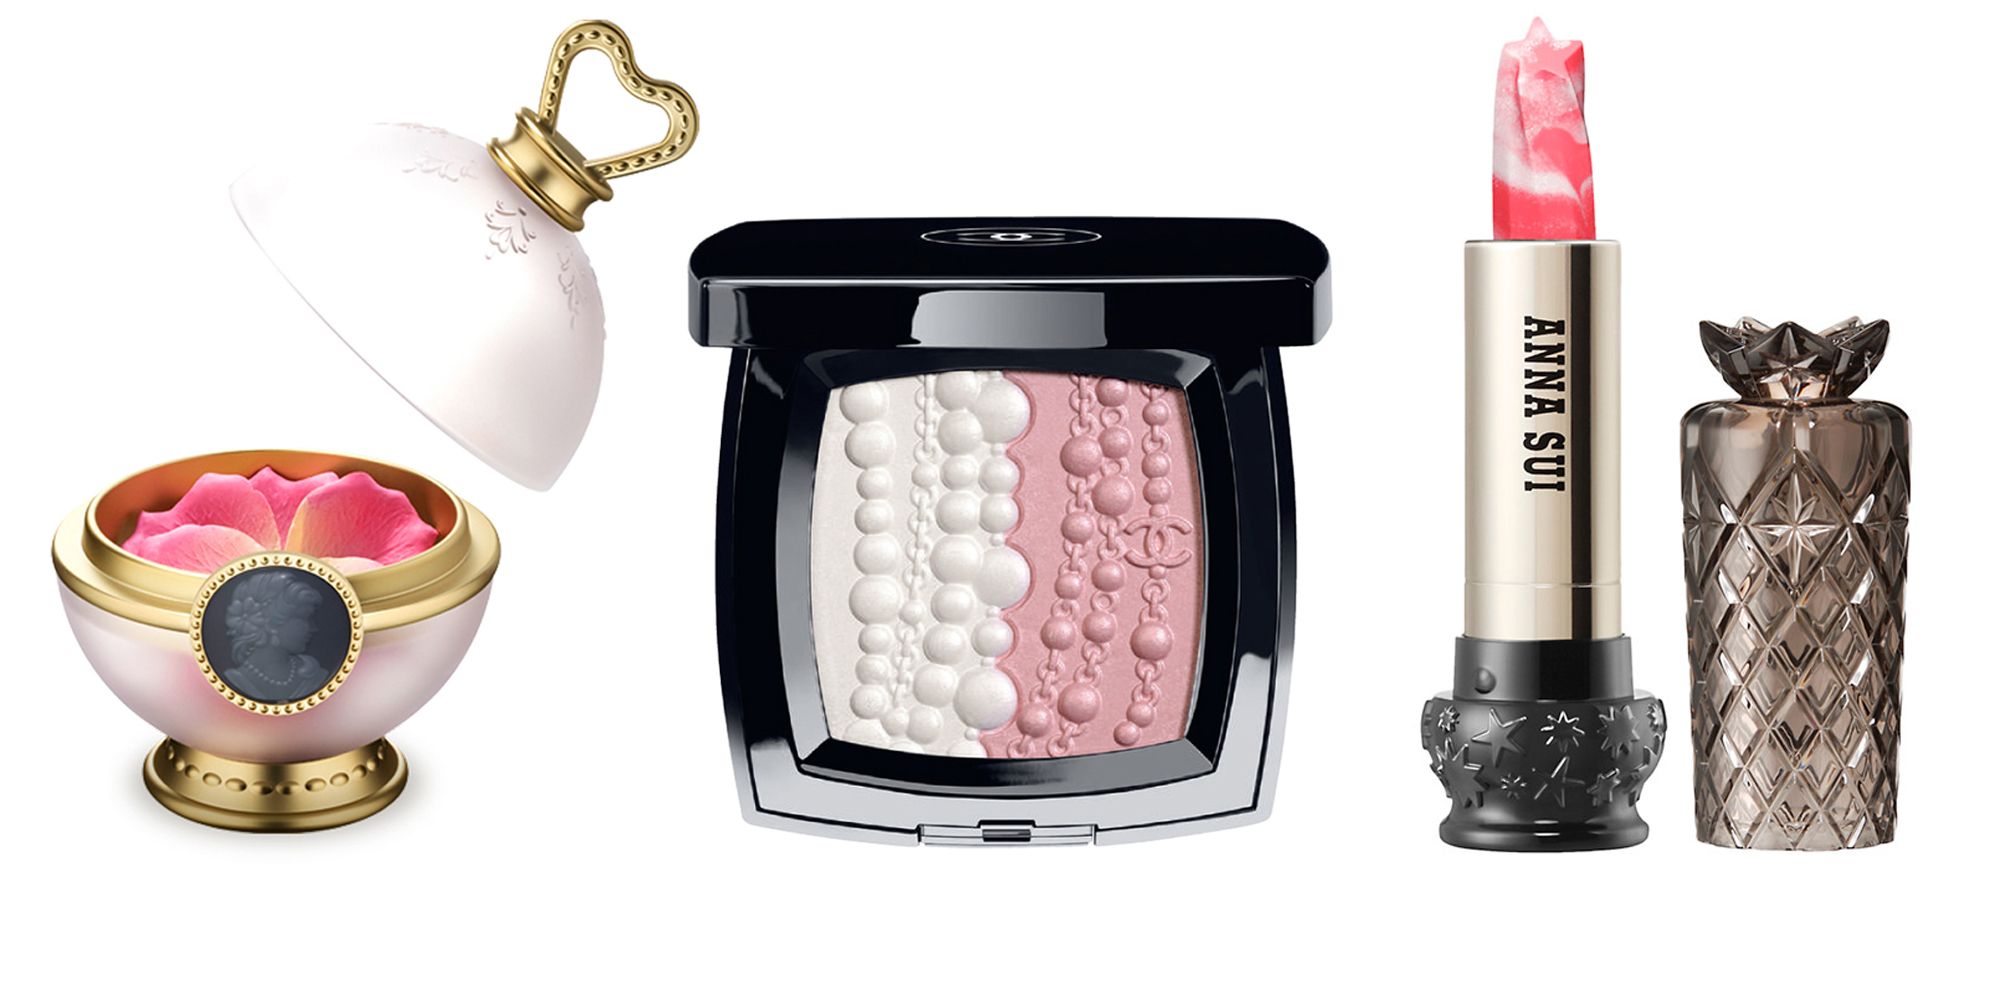 The 10 Most Creatively Packaged Cosmetics